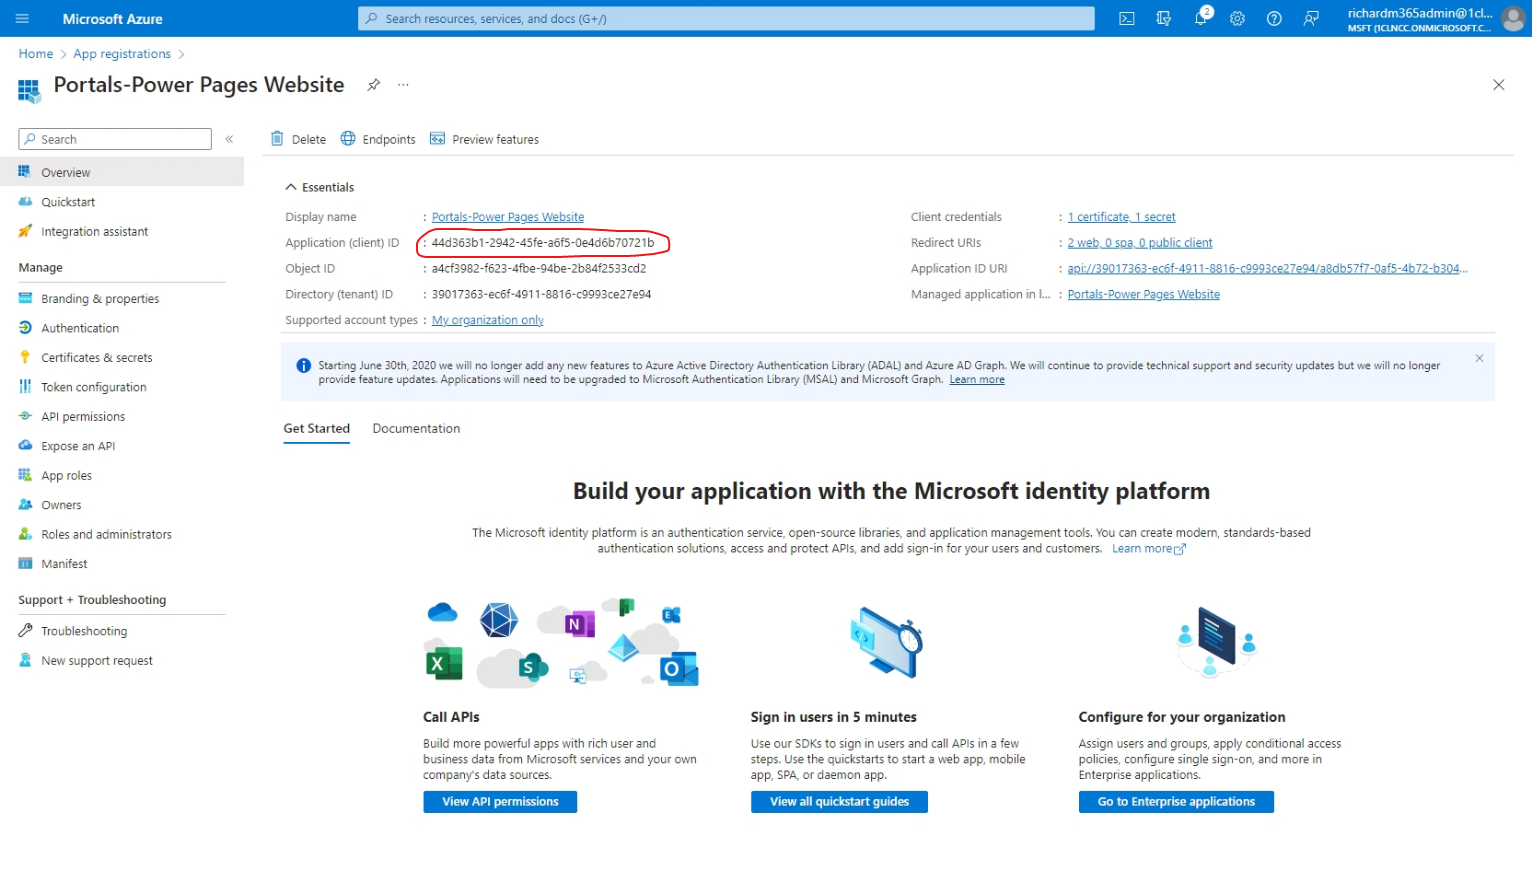 Azure app registration Overview screen with Applicant (client) ID circled.